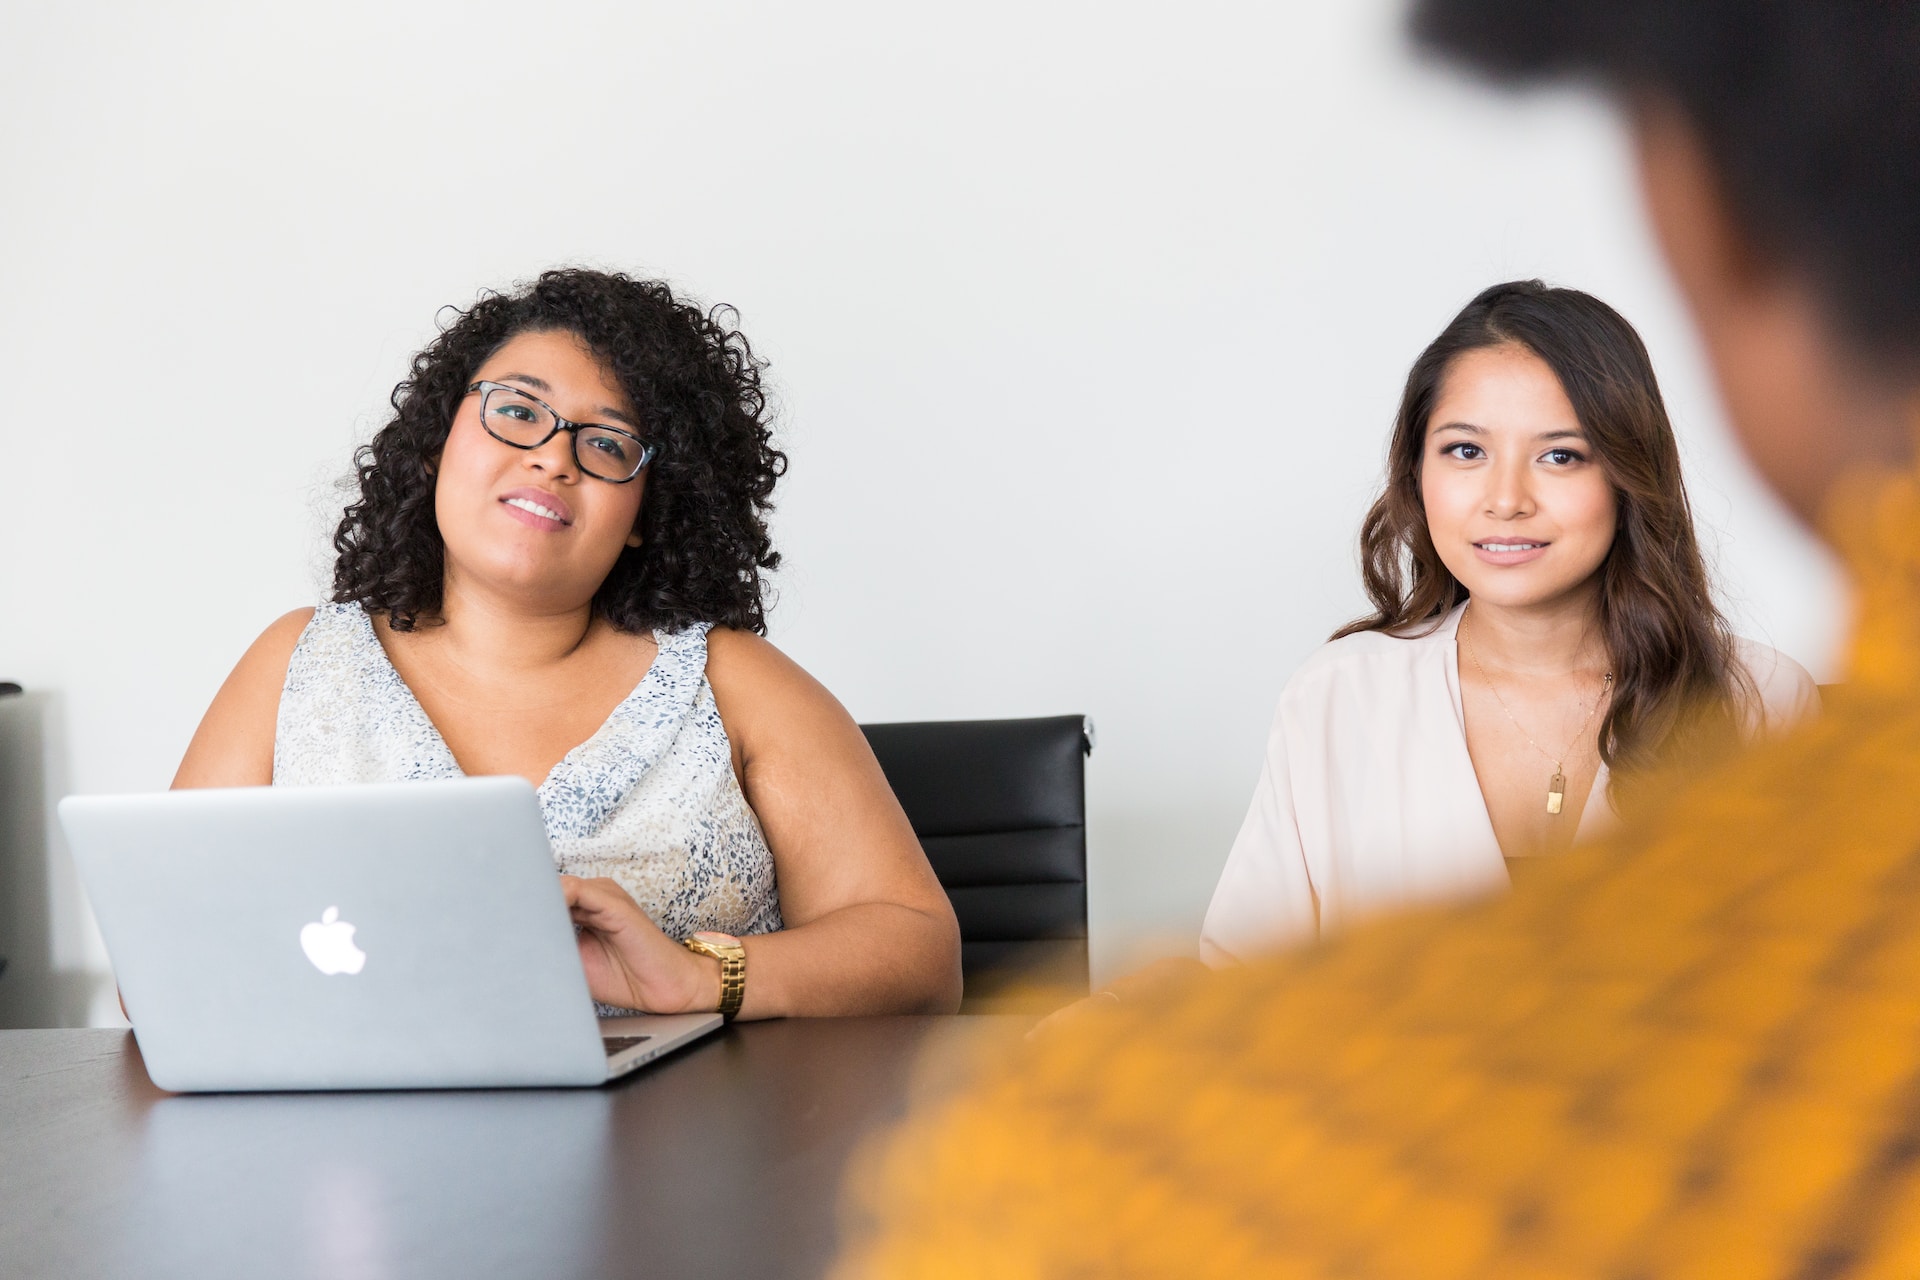 Two women interviewing an applicant in the office. Photo by Christina @ wocintechchat.com on Unsplash